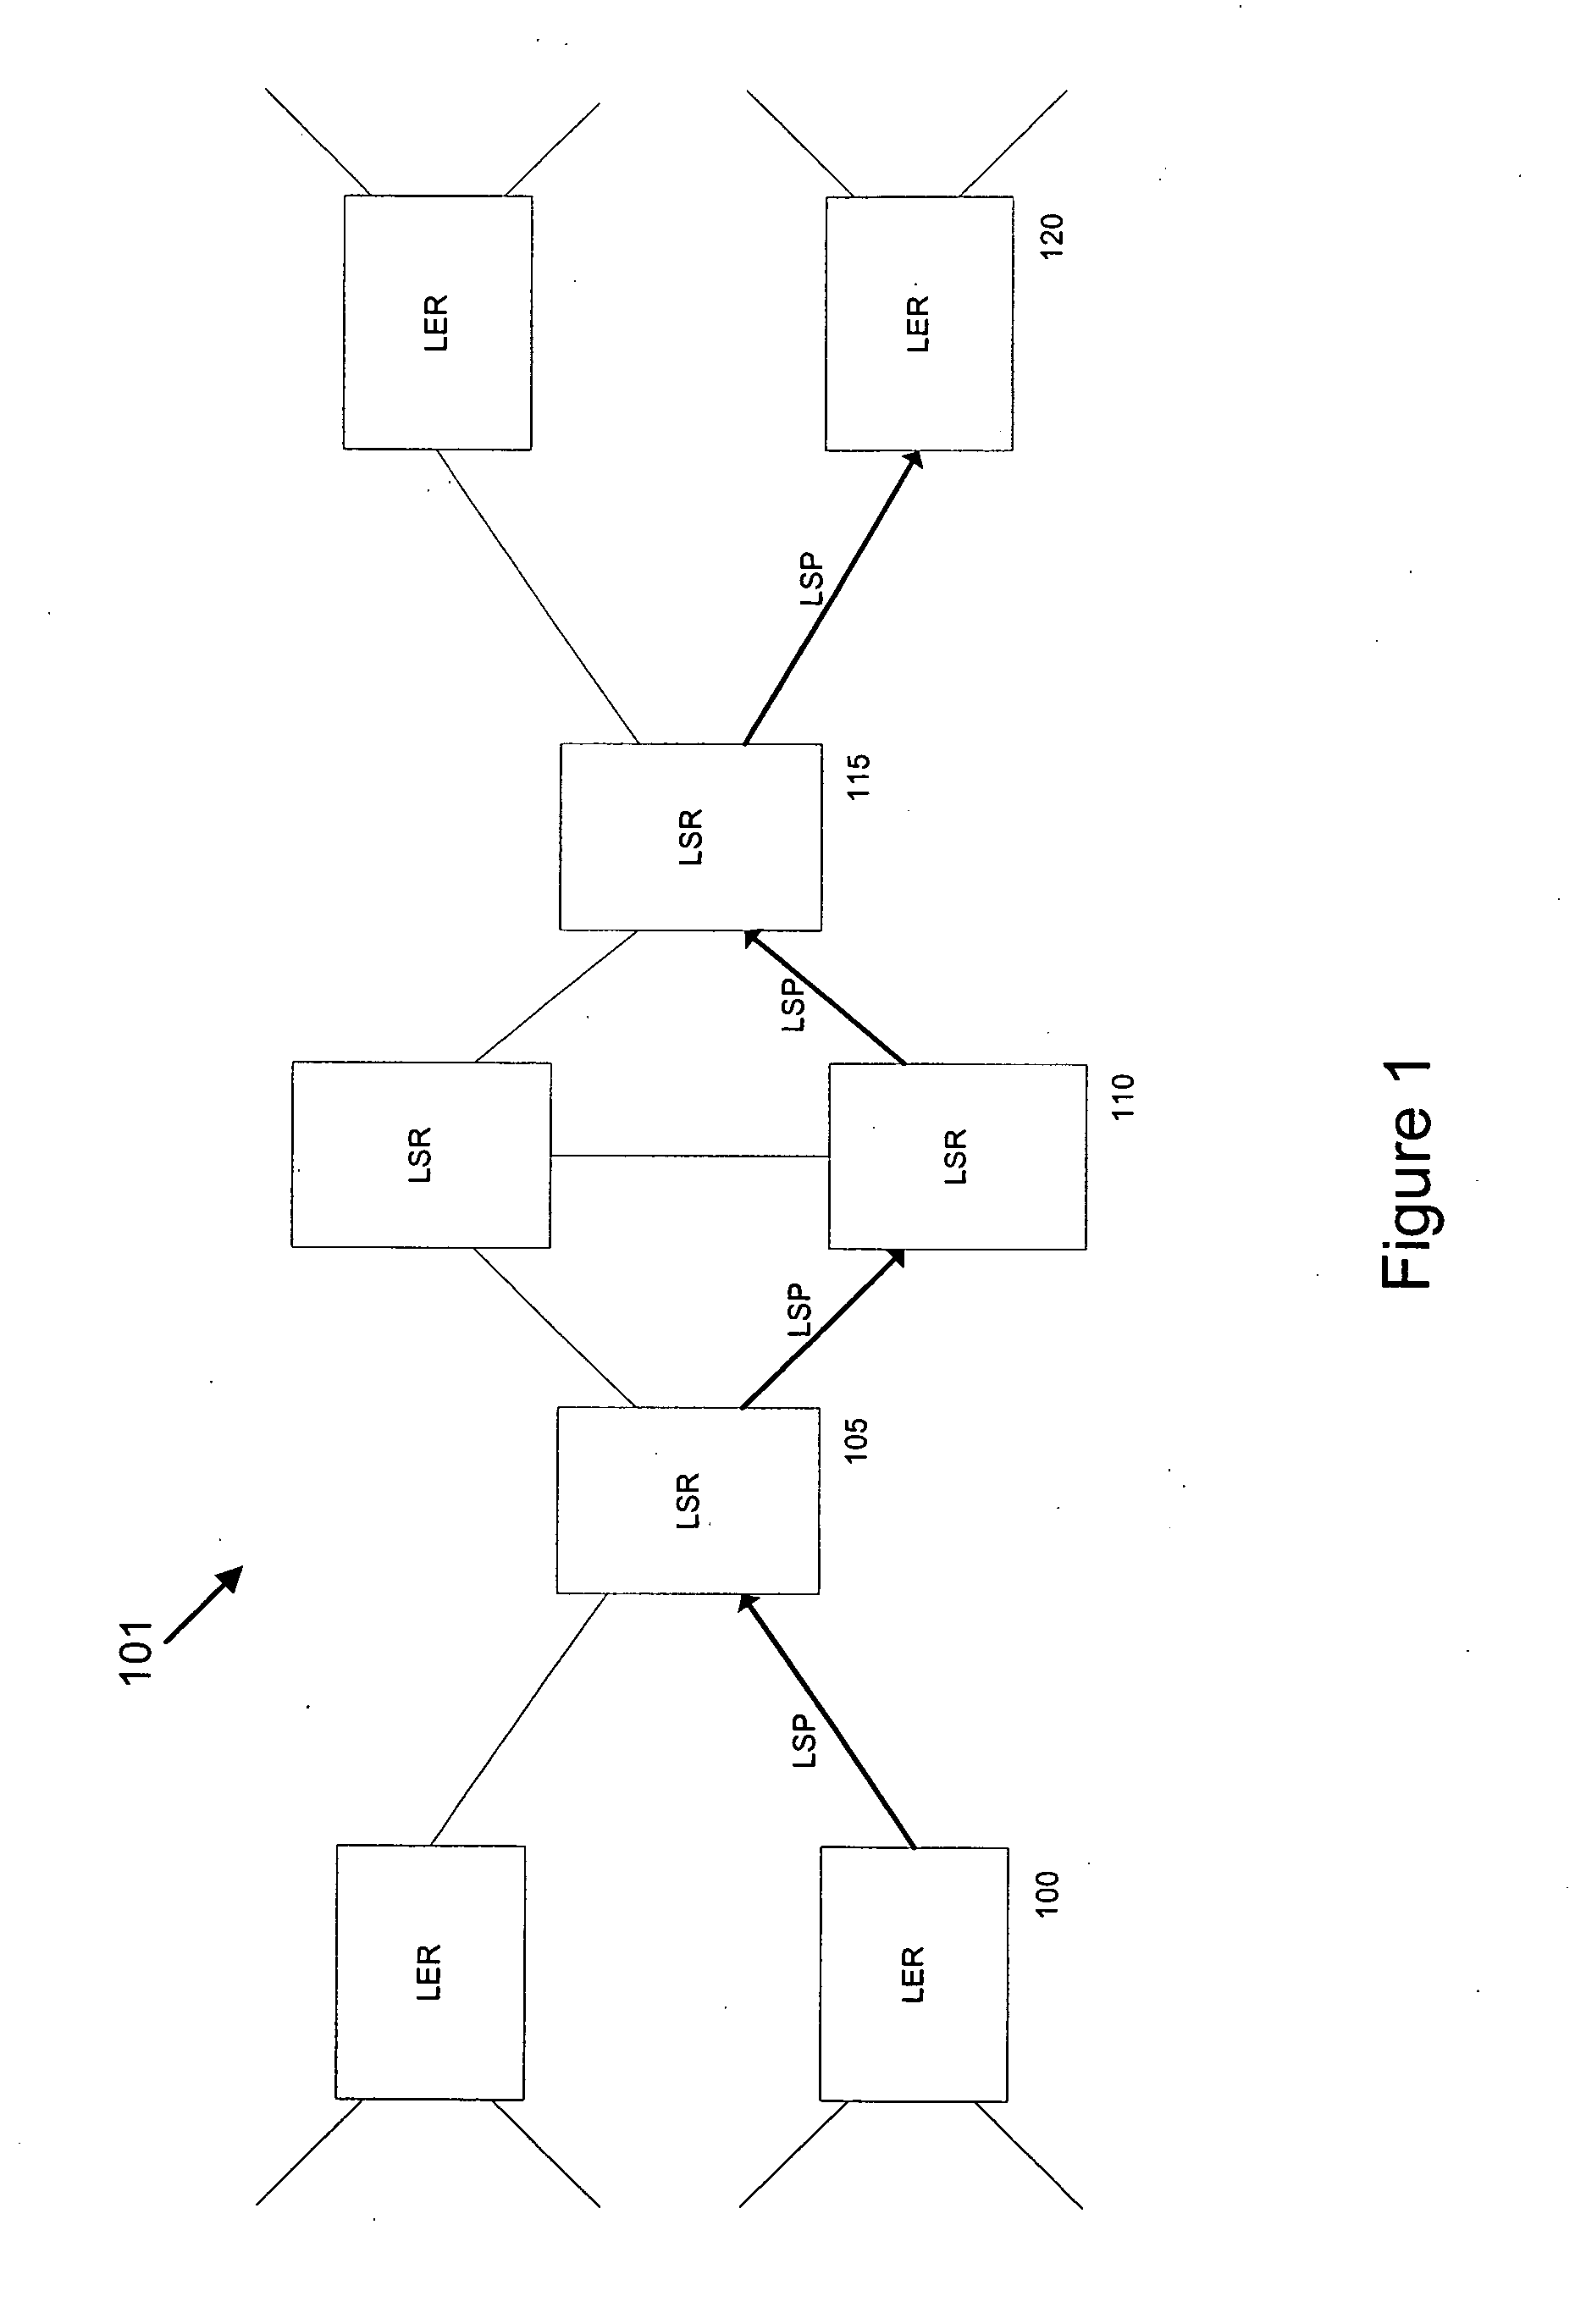 Differentiated services using weighted quality of service (QoS)